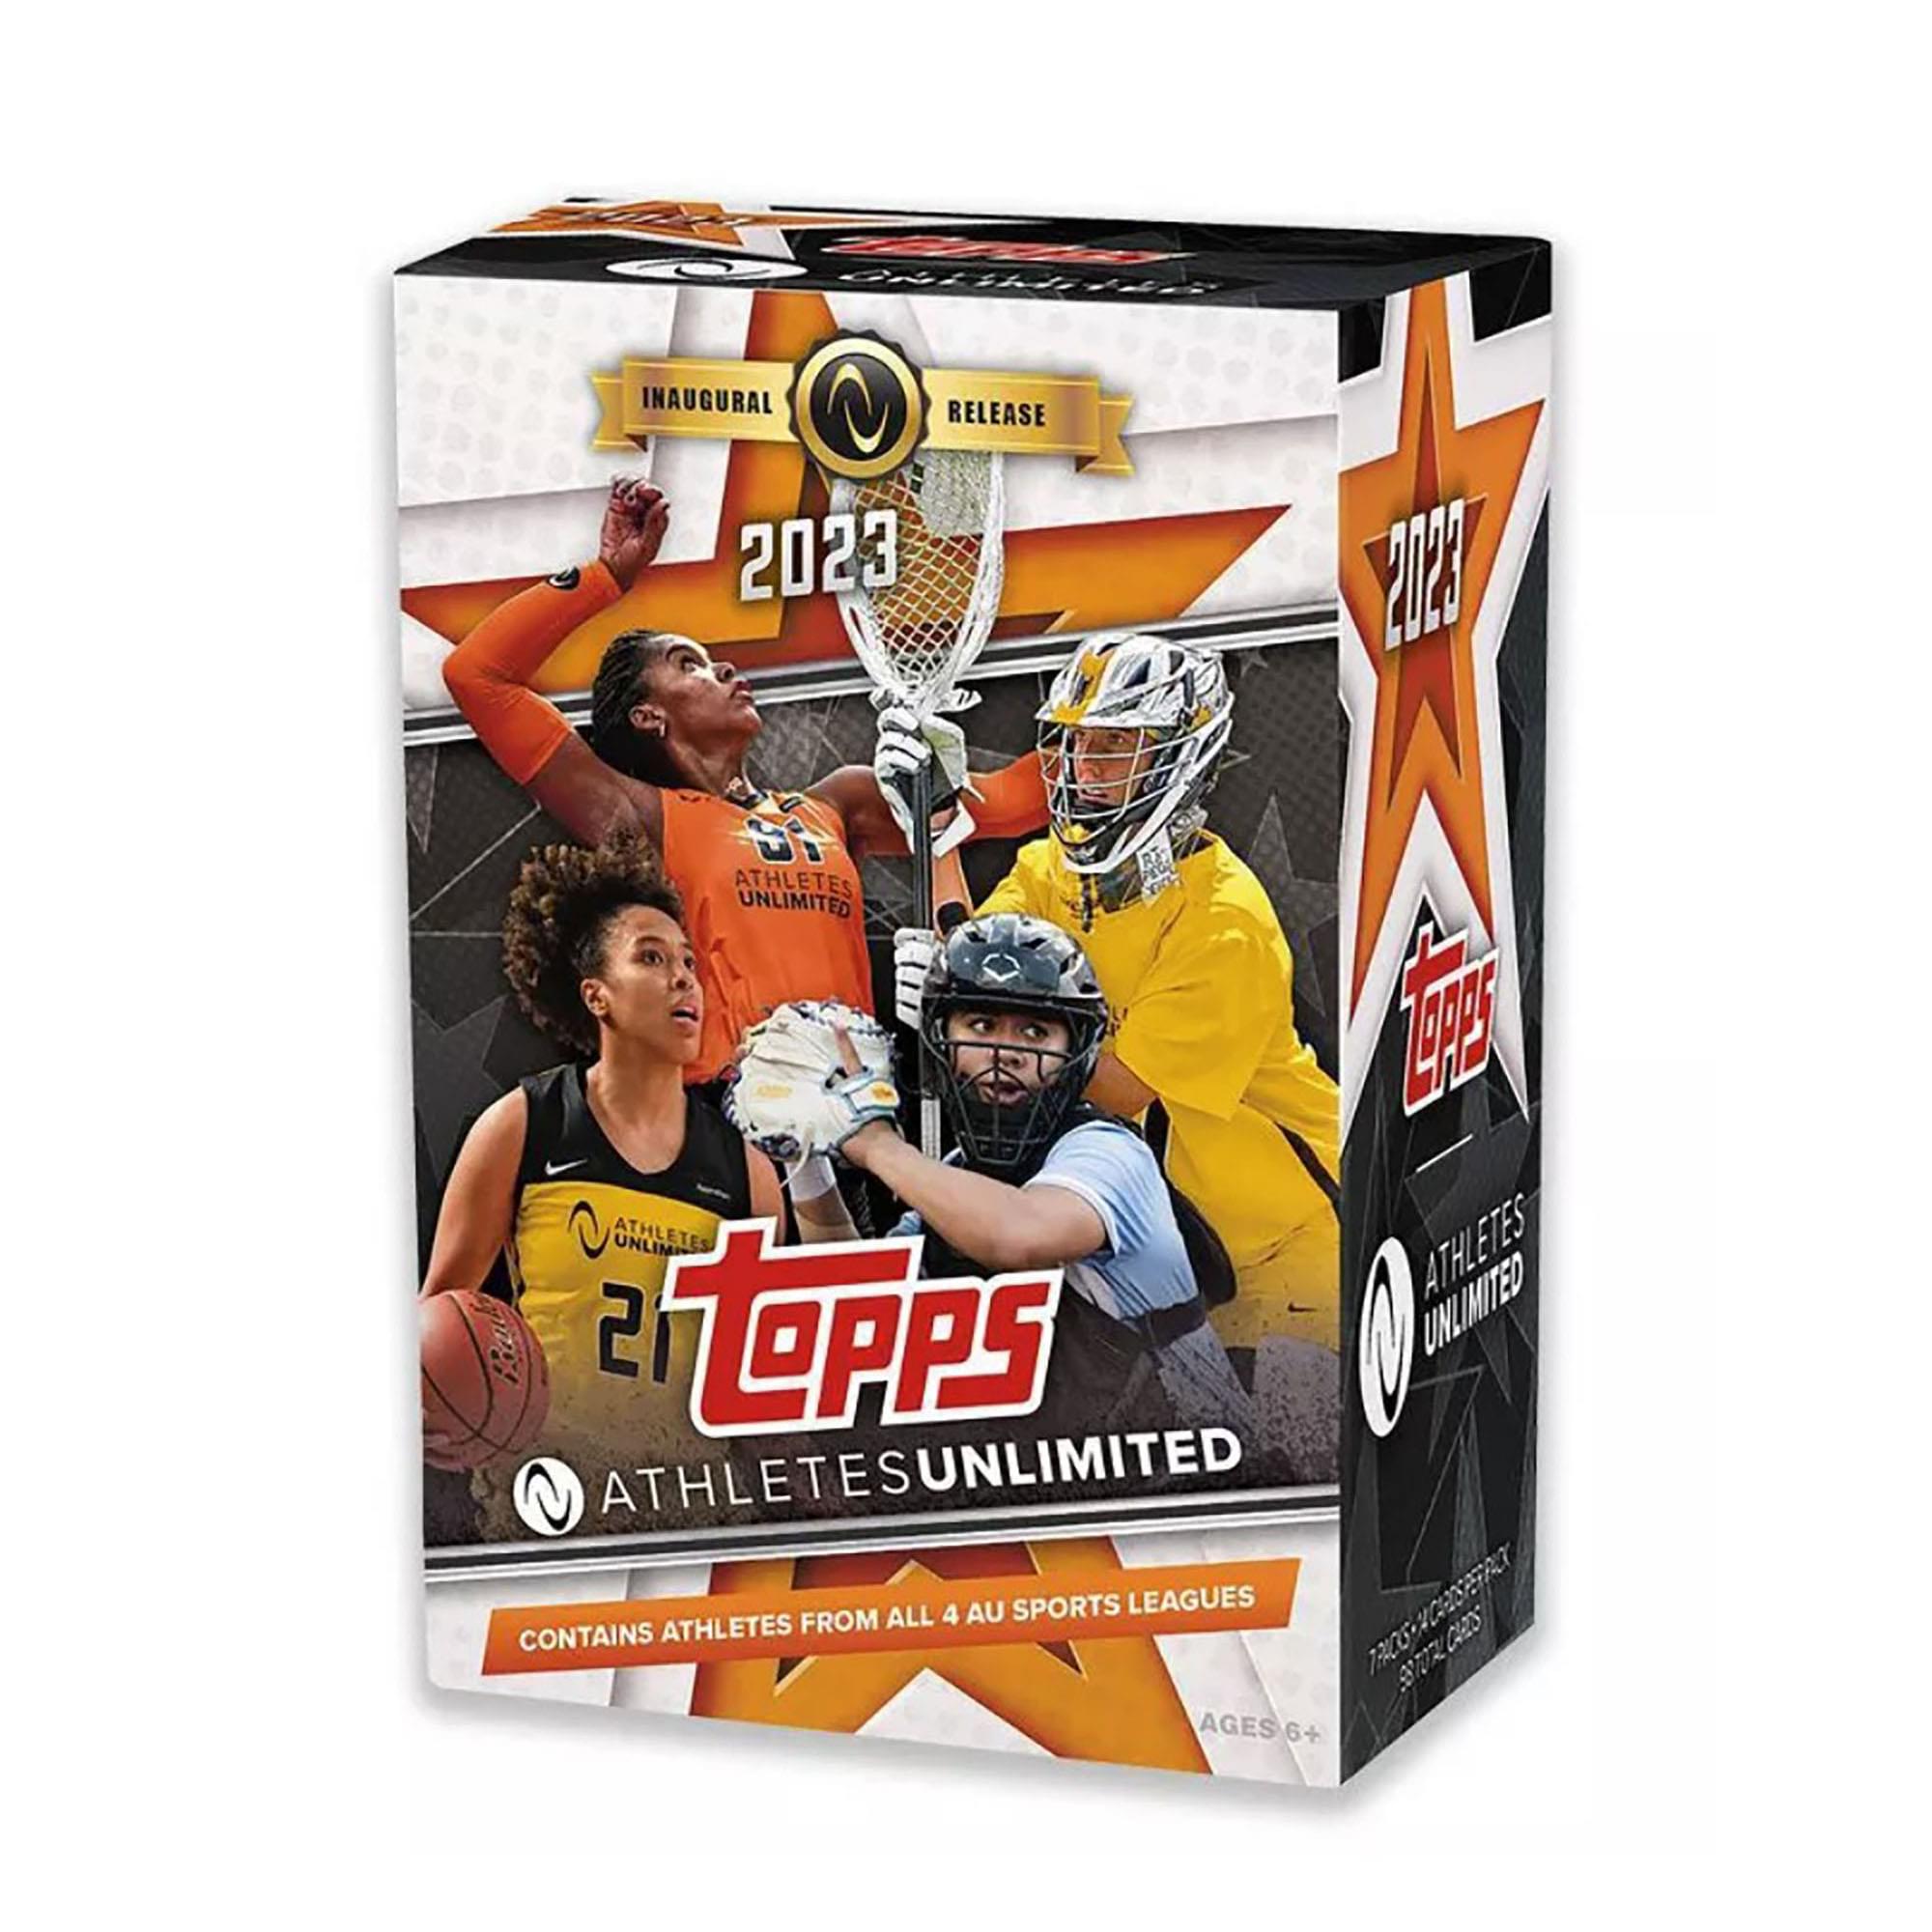 2023 Topps Athletes Unlimited All Sports Value Box Free Shipping